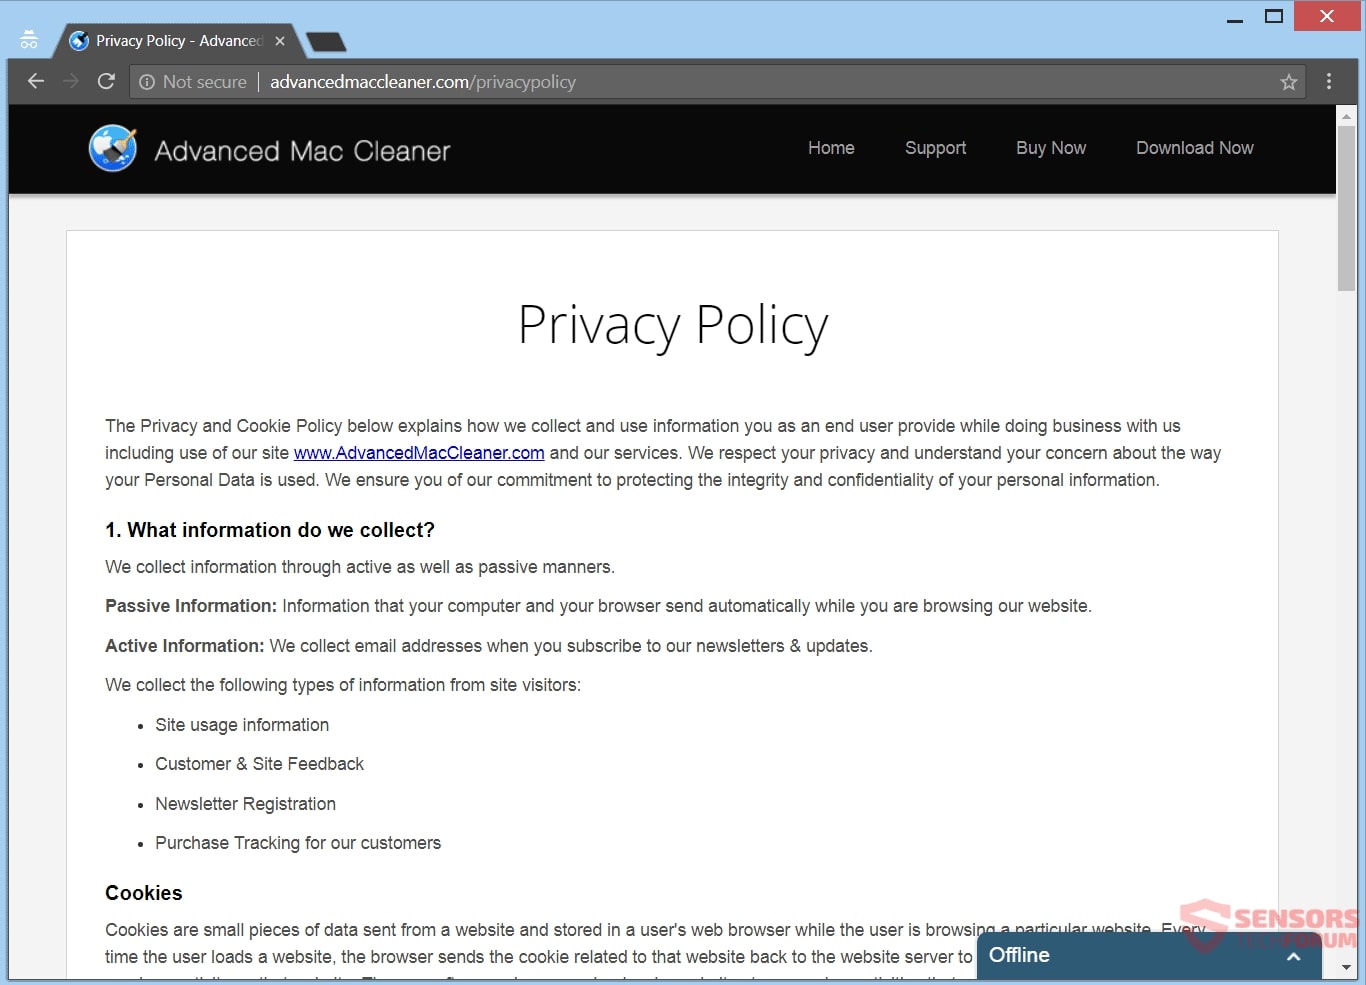 stf-advanced-mac-cleaner-pup-official-site-privacy-policy-page